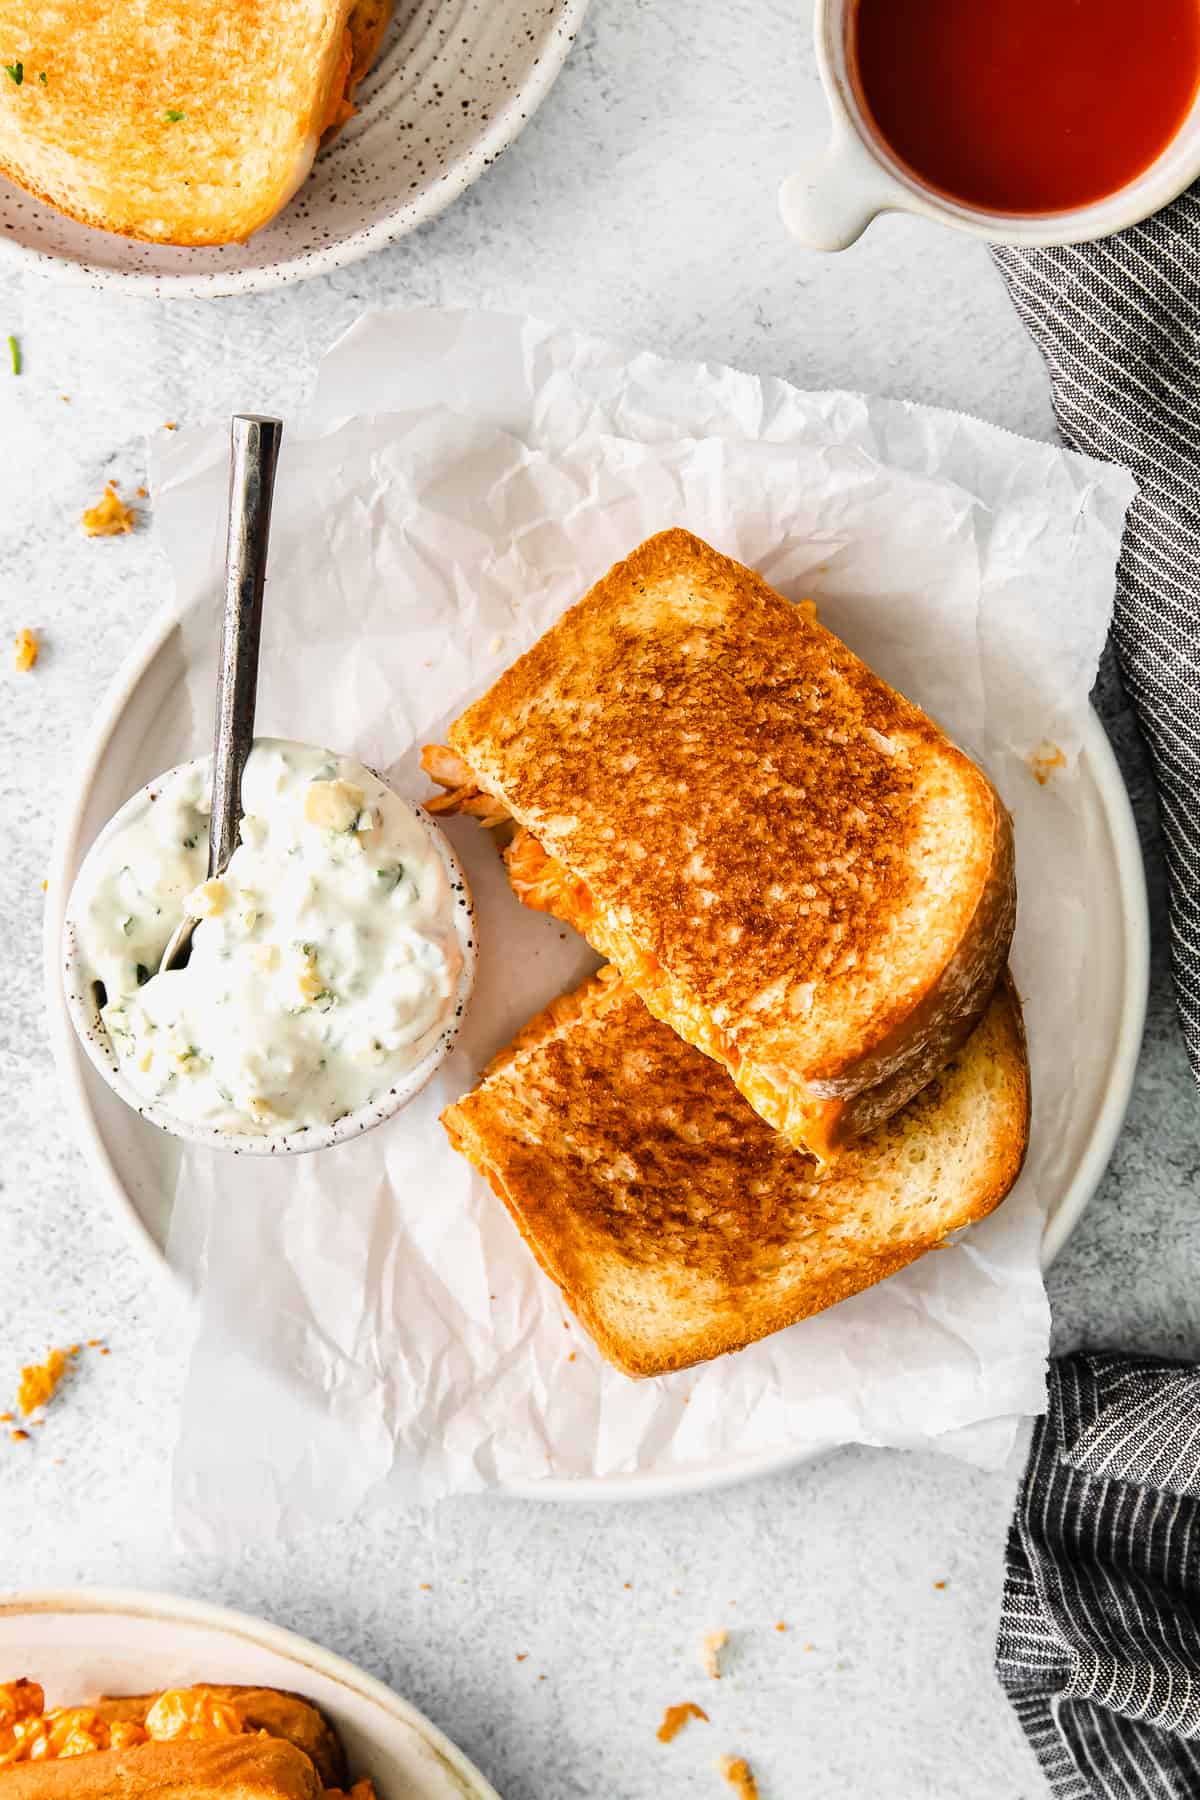 Grilled cheese on plate.